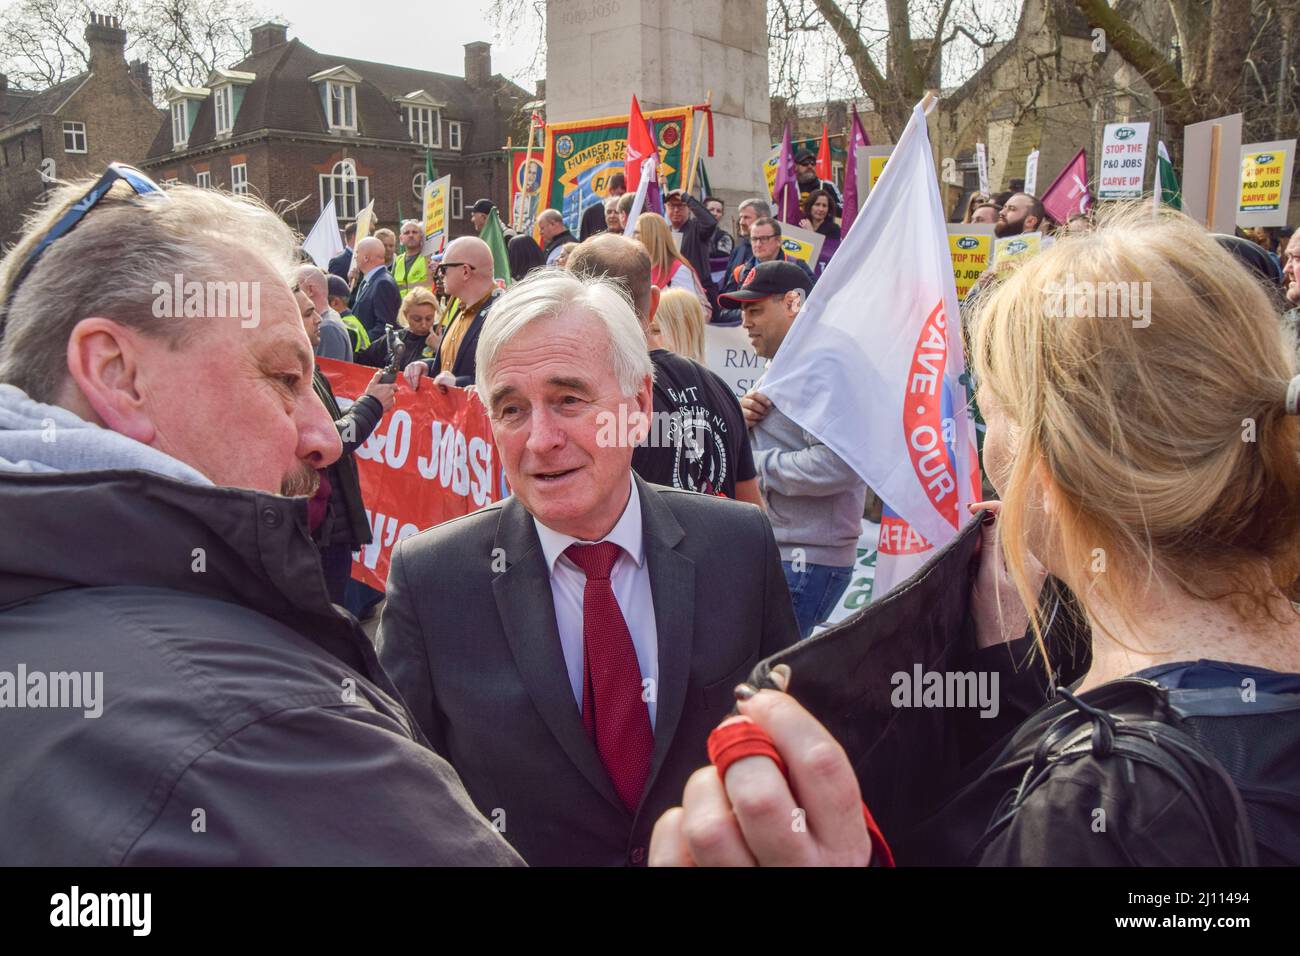 London, UK. 21st March 2022. Labour MP John McDonnell speaks to protesters outside Parliament. P&O Ferries staff and RMT Union members marched from the headquarters of DP World, the company which owns P&O, to Parliament, after 800 UK staff were fired and replaced by agency workers. Credit: Vuk Valcic/Alamy Live Newsspeaking Stock Photo